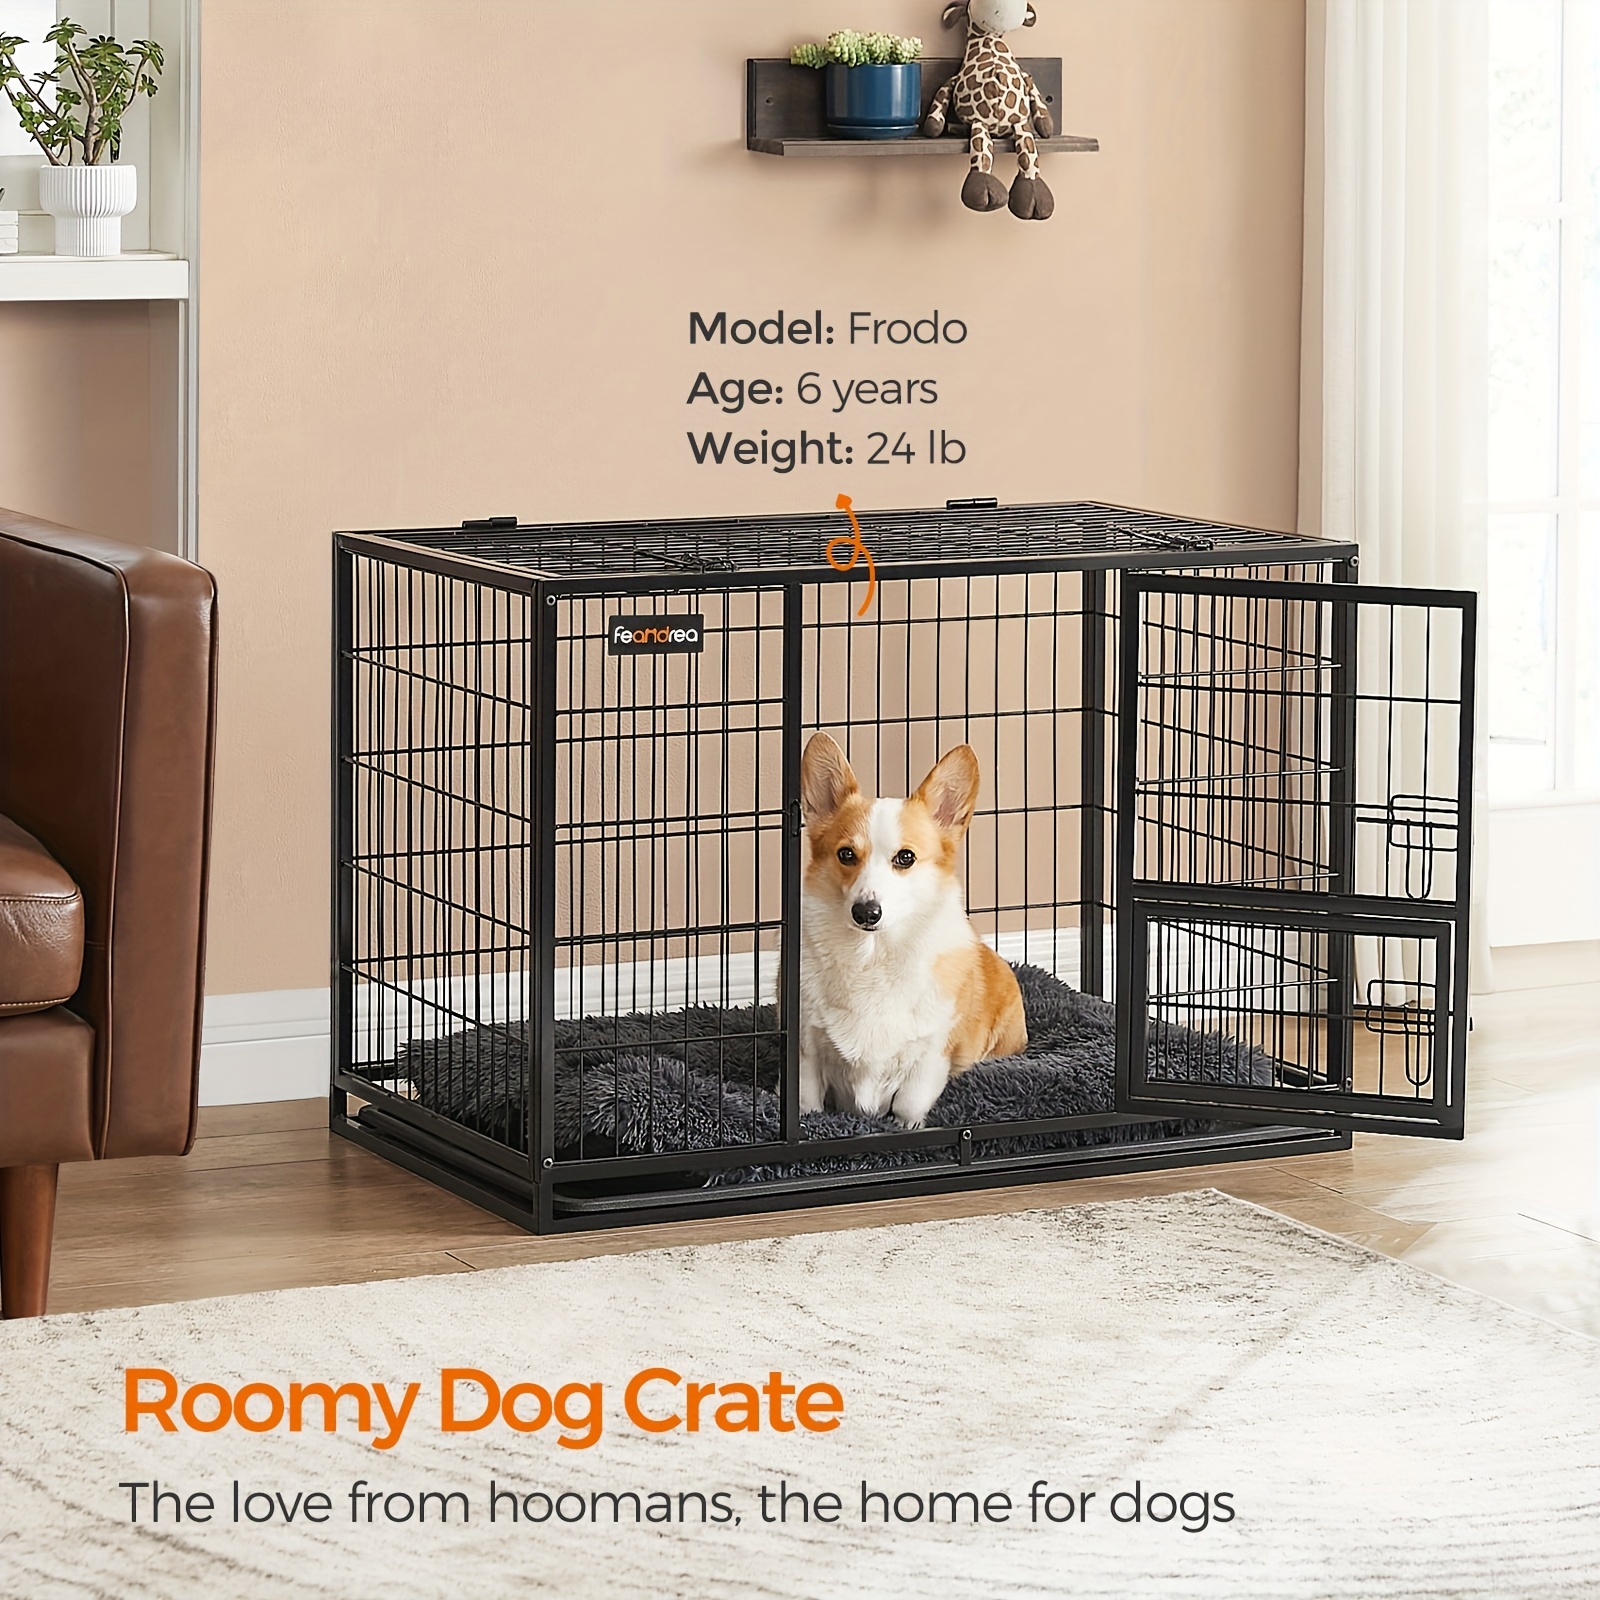 

Feandrea Heavy-duty Dog Crate, Metal Dog Kennel And Cage With Removable Tray, L For Small And Medium Dogs, 36.4 X 22.6 X 25.2 Inches, Black